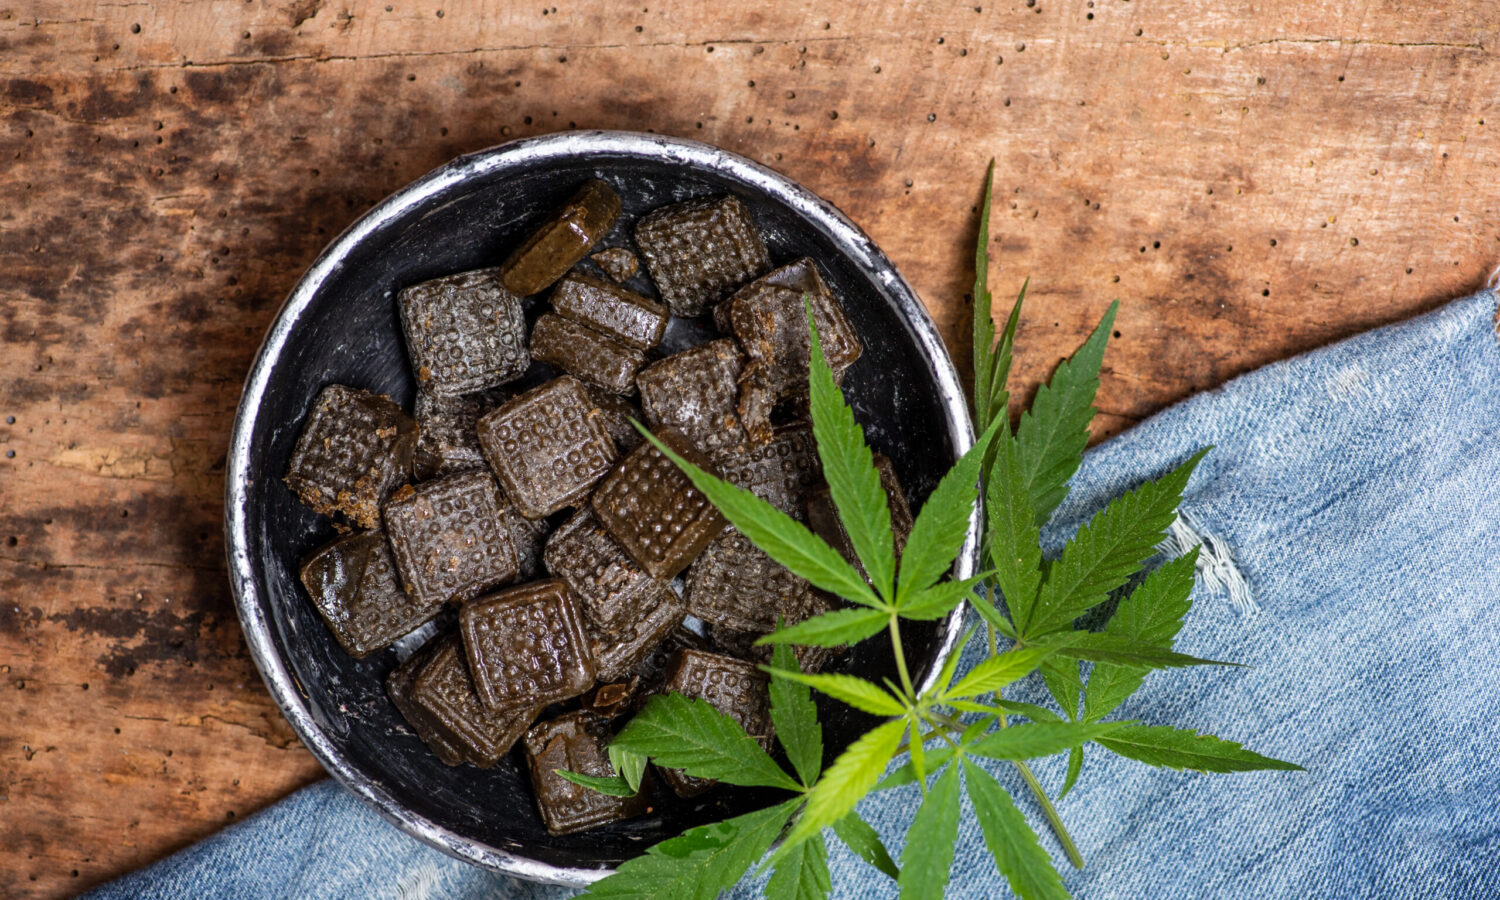 Why You Can't Buy Edibles In New Jersey